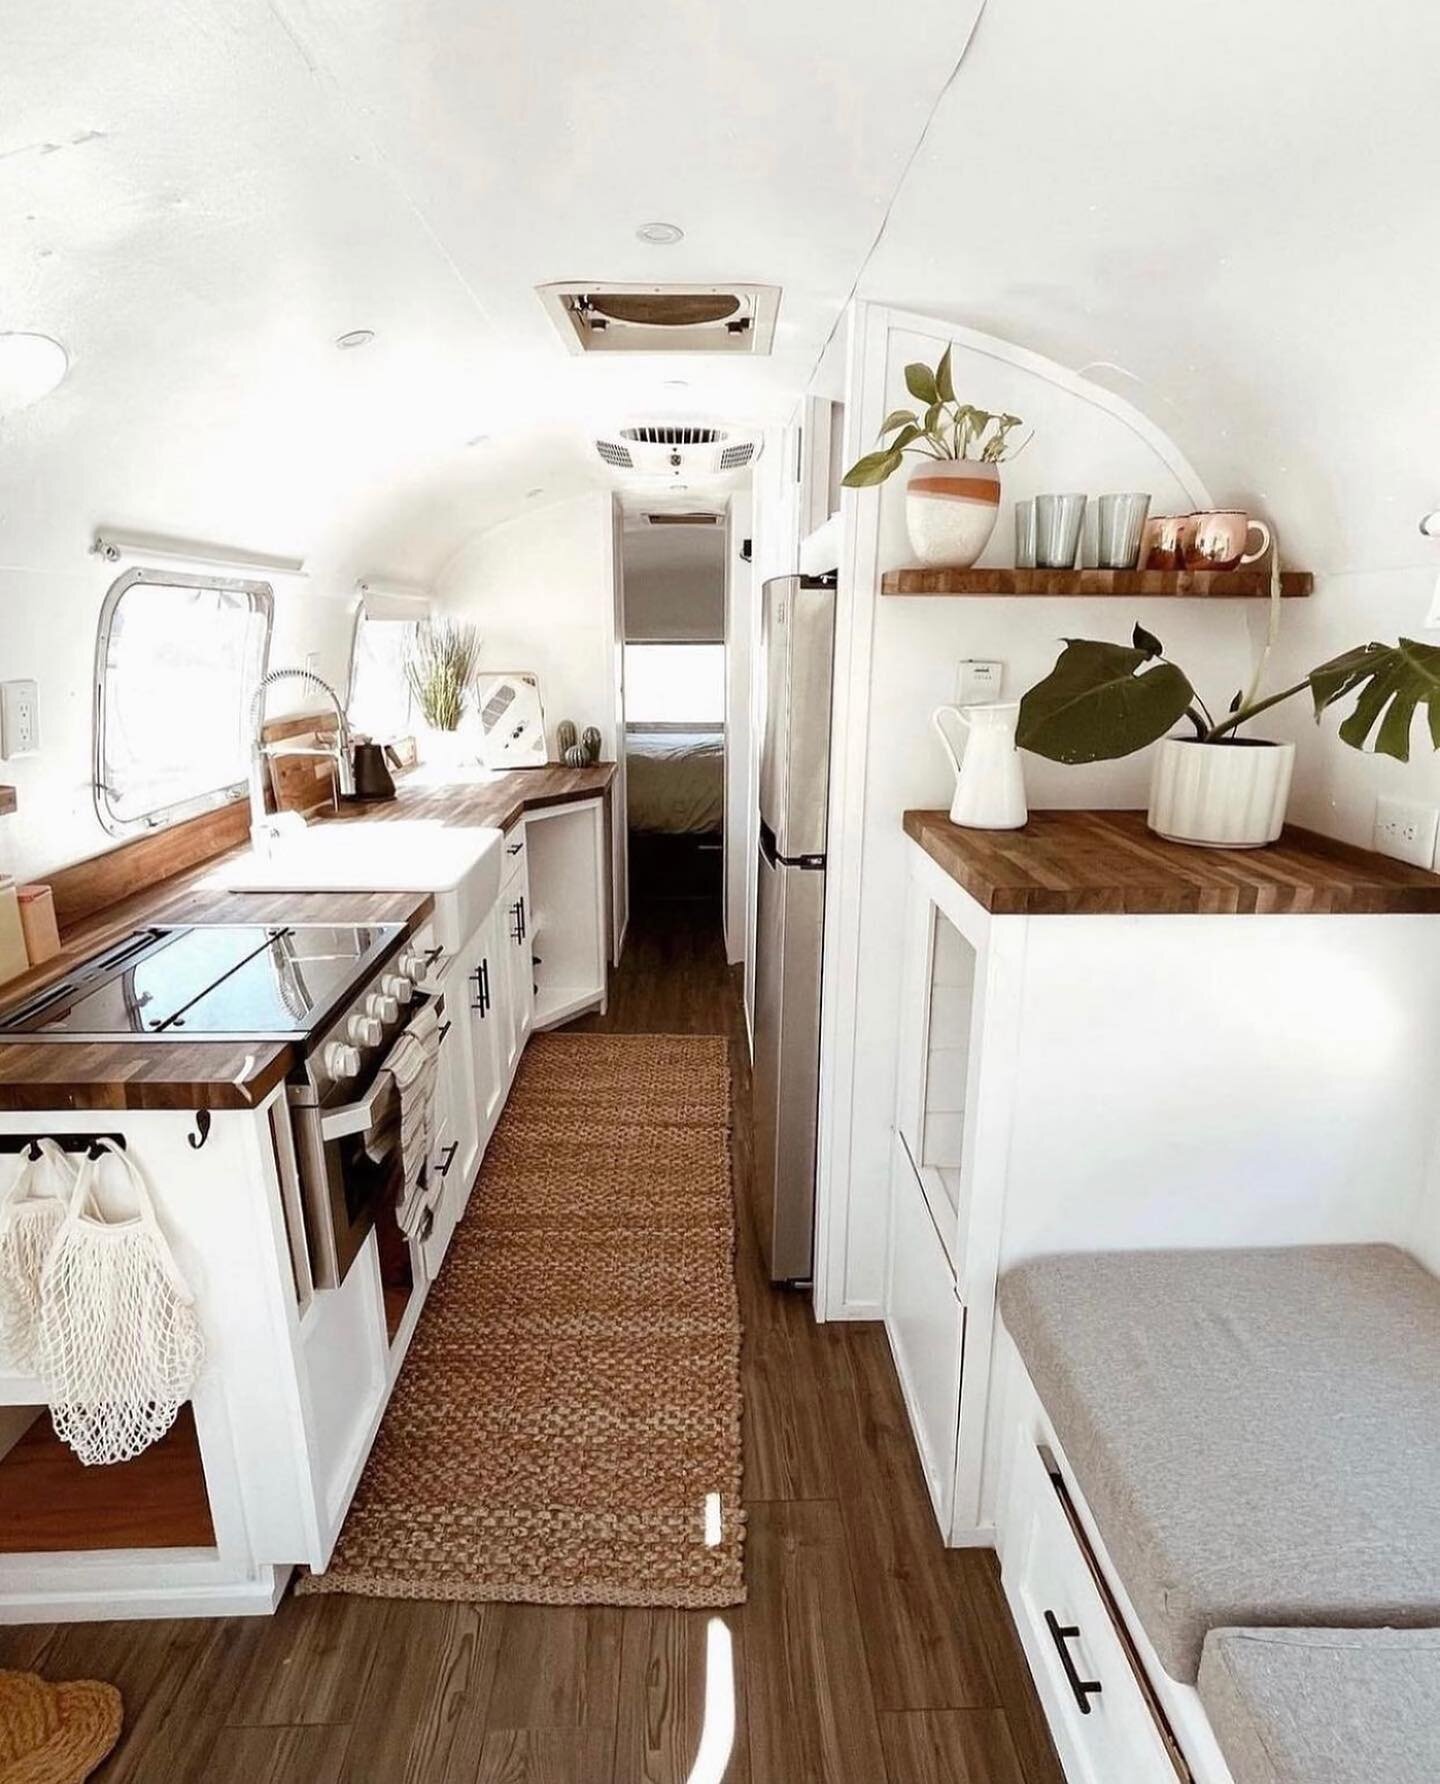 Y&rsquo;all, we are having to move the Airstream again! We&rsquo;re actually thinking it may be time to sell. It&rsquo;s a 1973 Airstream Land Yatch Sovereign, 31 ft. If you know anyone interested in starting an Airbnb or someone who wants a gorgeous